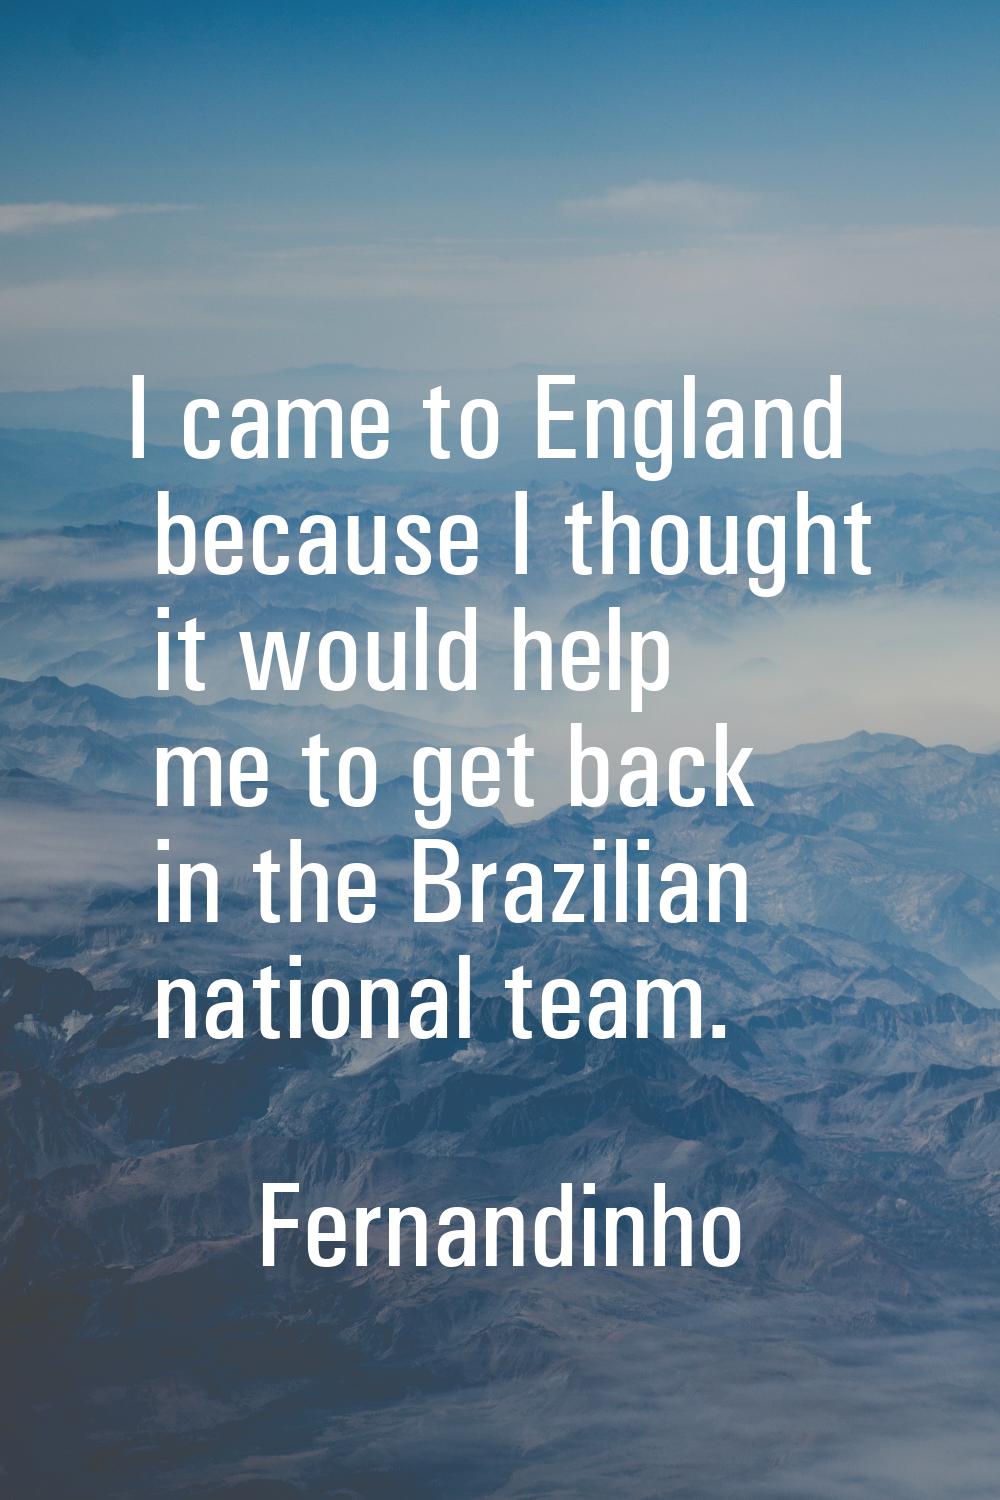 I came to England because I thought it would help me to get back in the Brazilian national team.